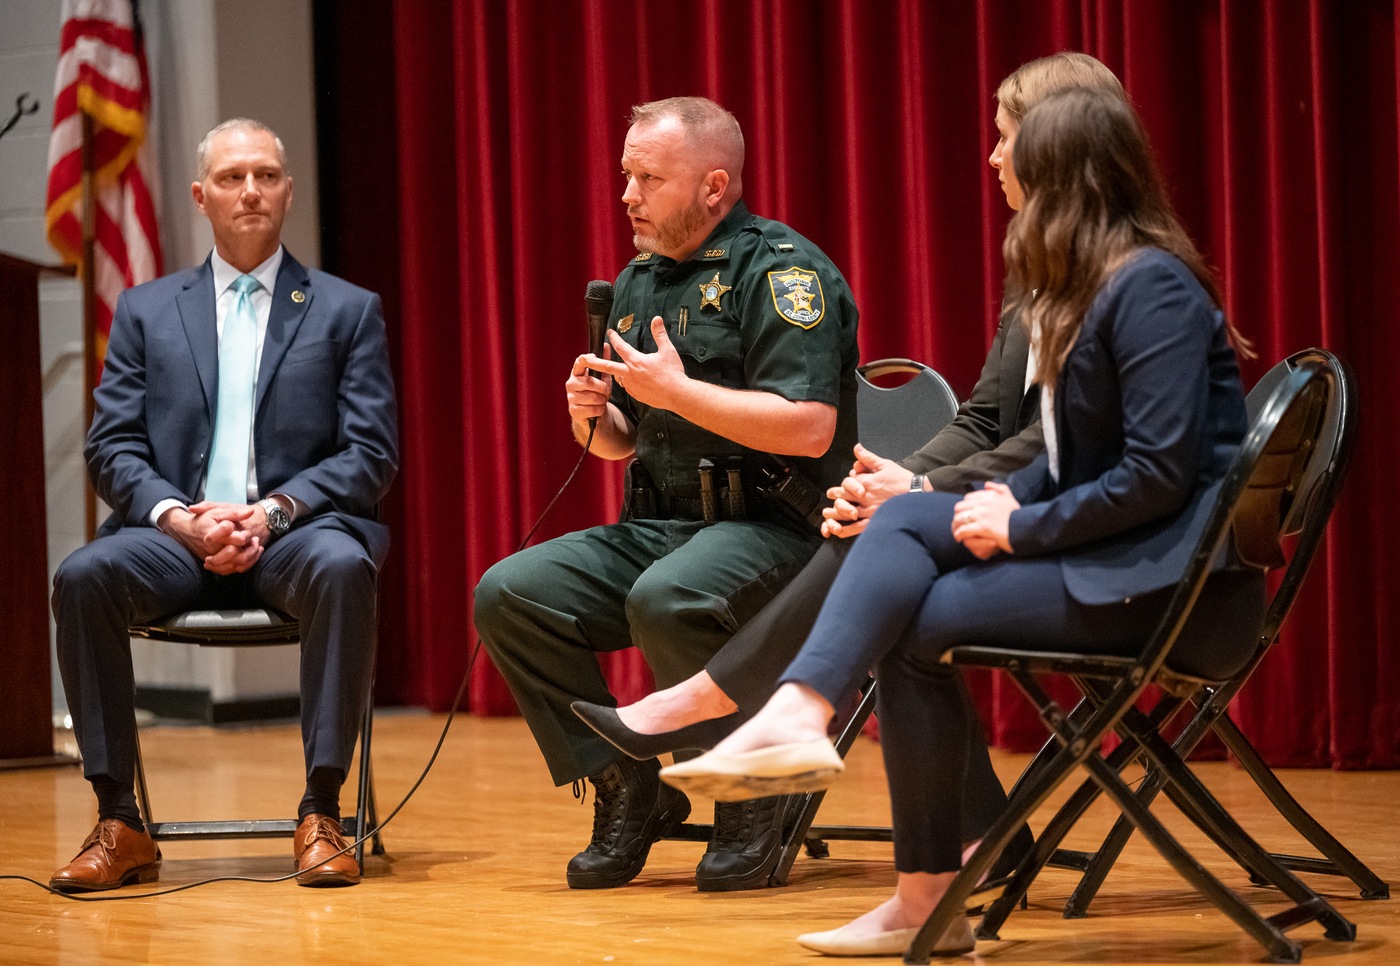 ASAC Markovsky, Lt. West Kennedy, of St. Johns County Sheriff Youth Services Unit, and two female FBI SAs answer questions from audience at a Be Smart With Your Kids' Smartphone event at Creekside High School in February, 2024.